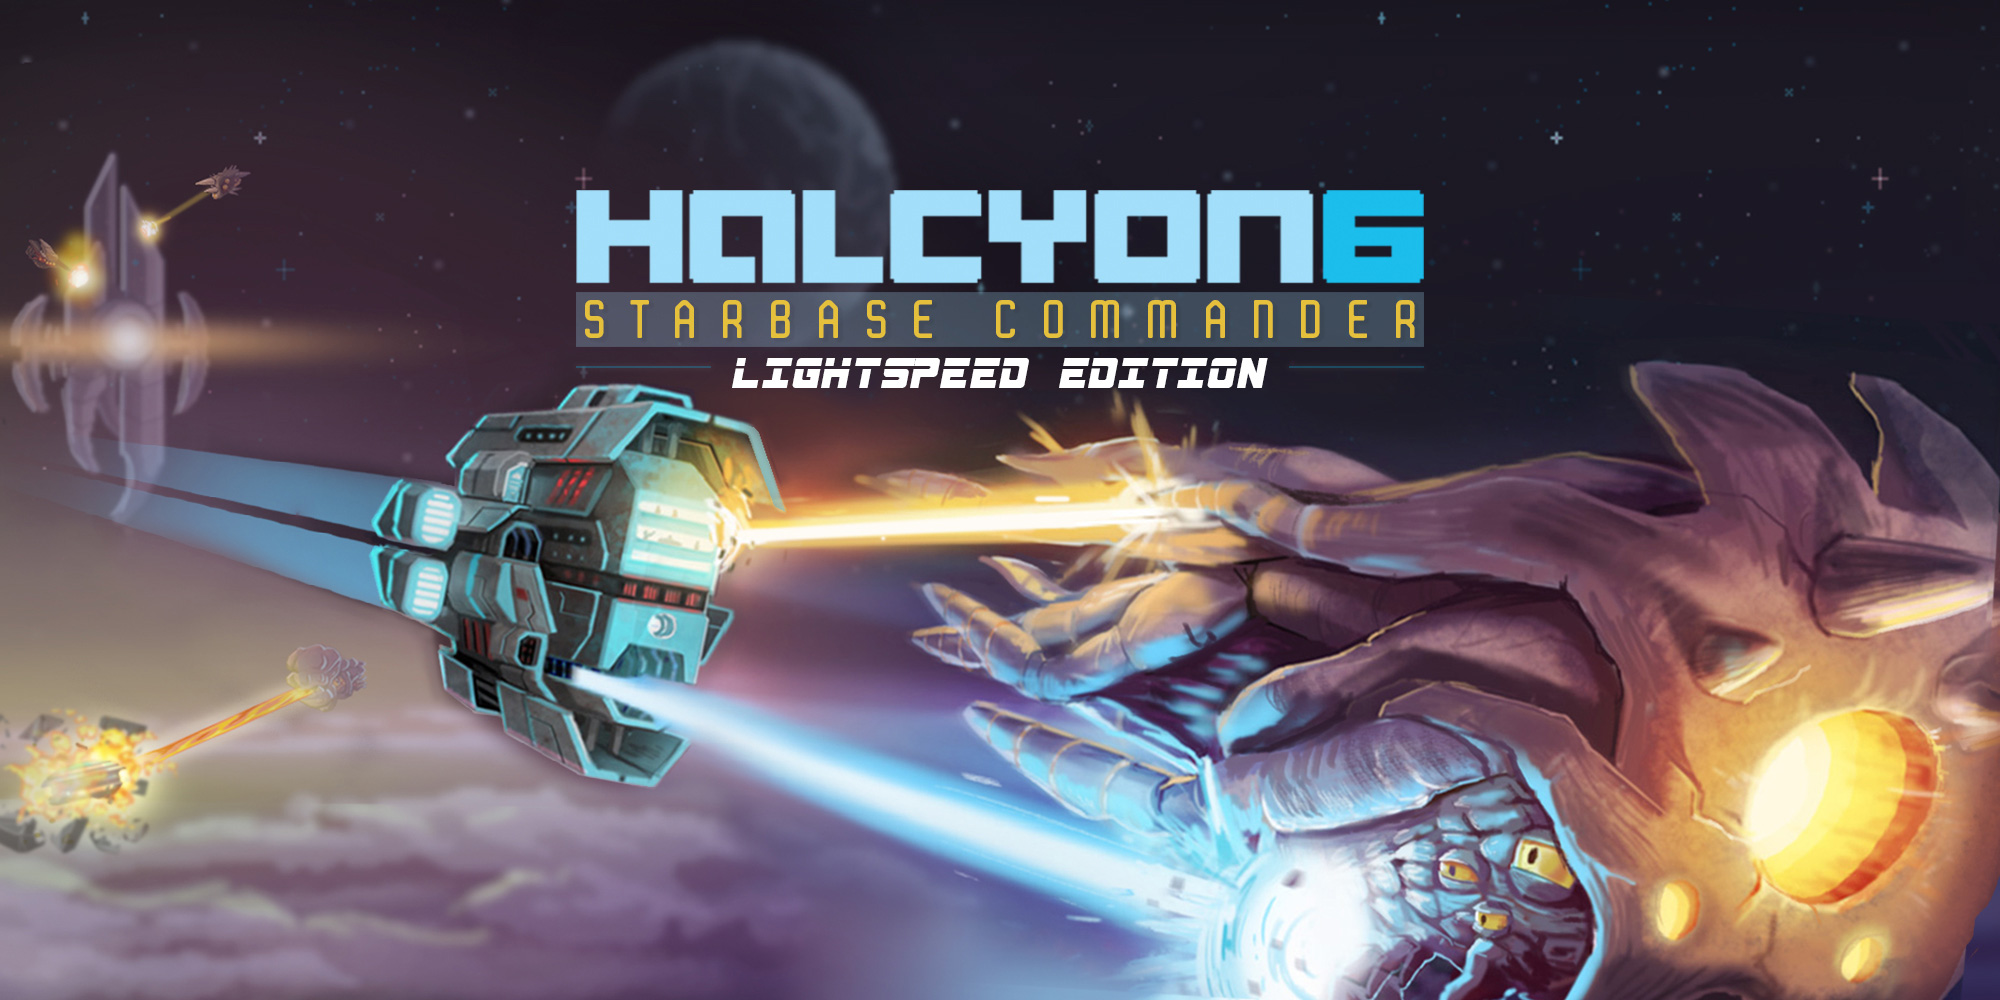 H2x1_NSwitchDS_Halcyon6StarbaseCommander.jpg